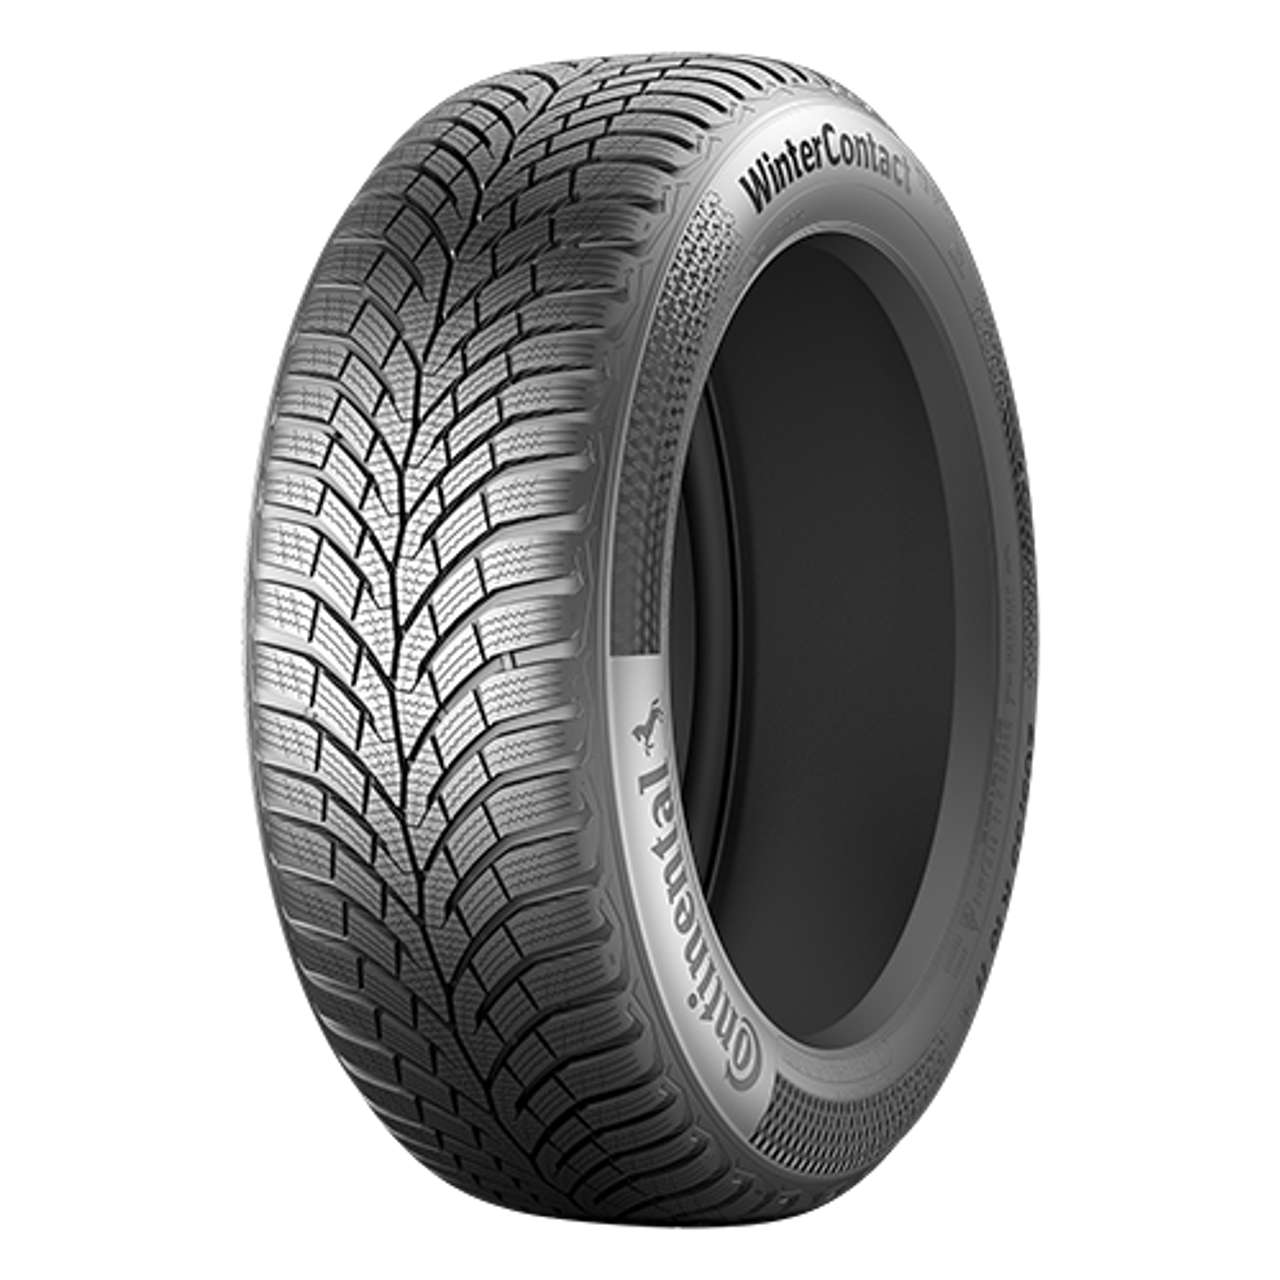 CONTINENTAL WINTERCONTACT TS 870 (EVc) 165/65R15 81T BSW